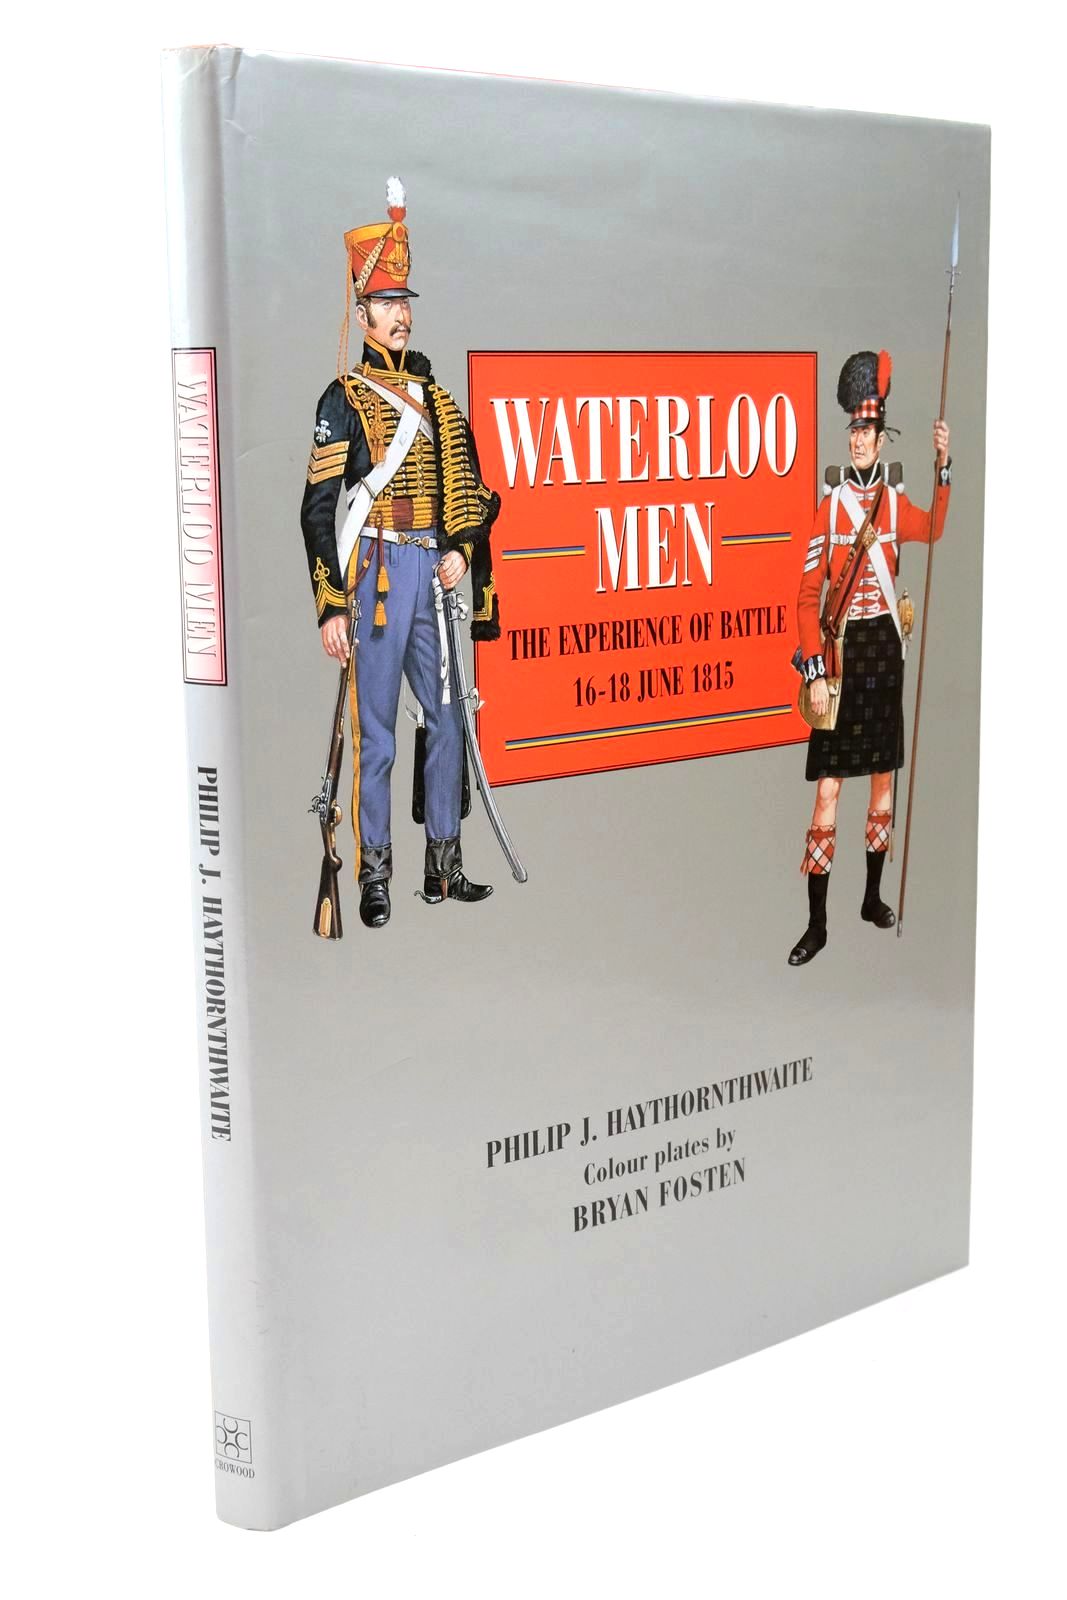 Photo of WATERLOO MEN: THE EXPERIENCE OF BATTLE 16-18 JUNE 1815 written by Haythornthwaite, Philip illustrated by Fosten, Bryan published by The Crowood Press (STOCK CODE: 1322630)  for sale by Stella & Rose's Books